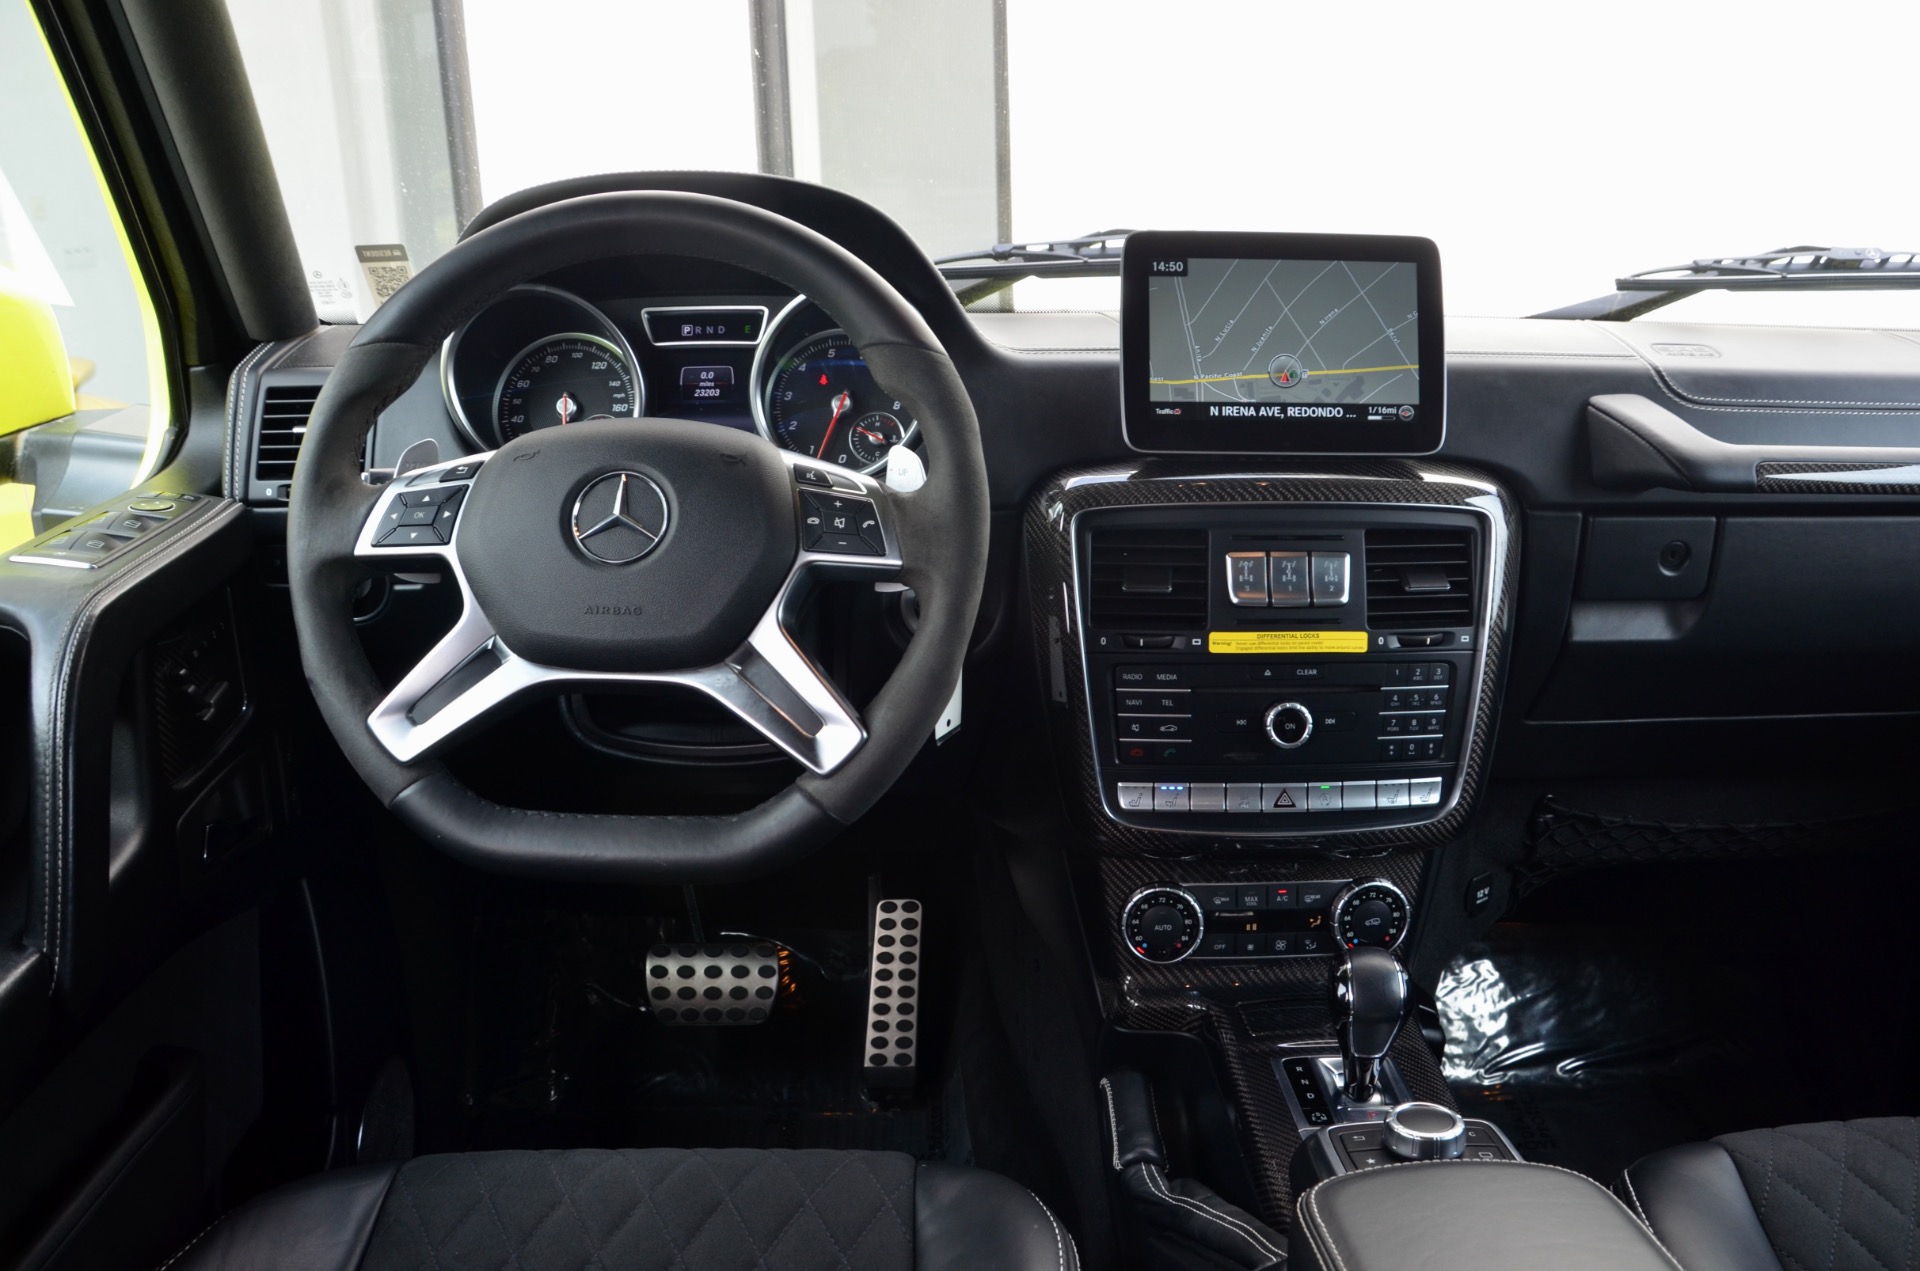 Used-2018-Mercedes-Benz-G-Class-G-550-4x4-Squared